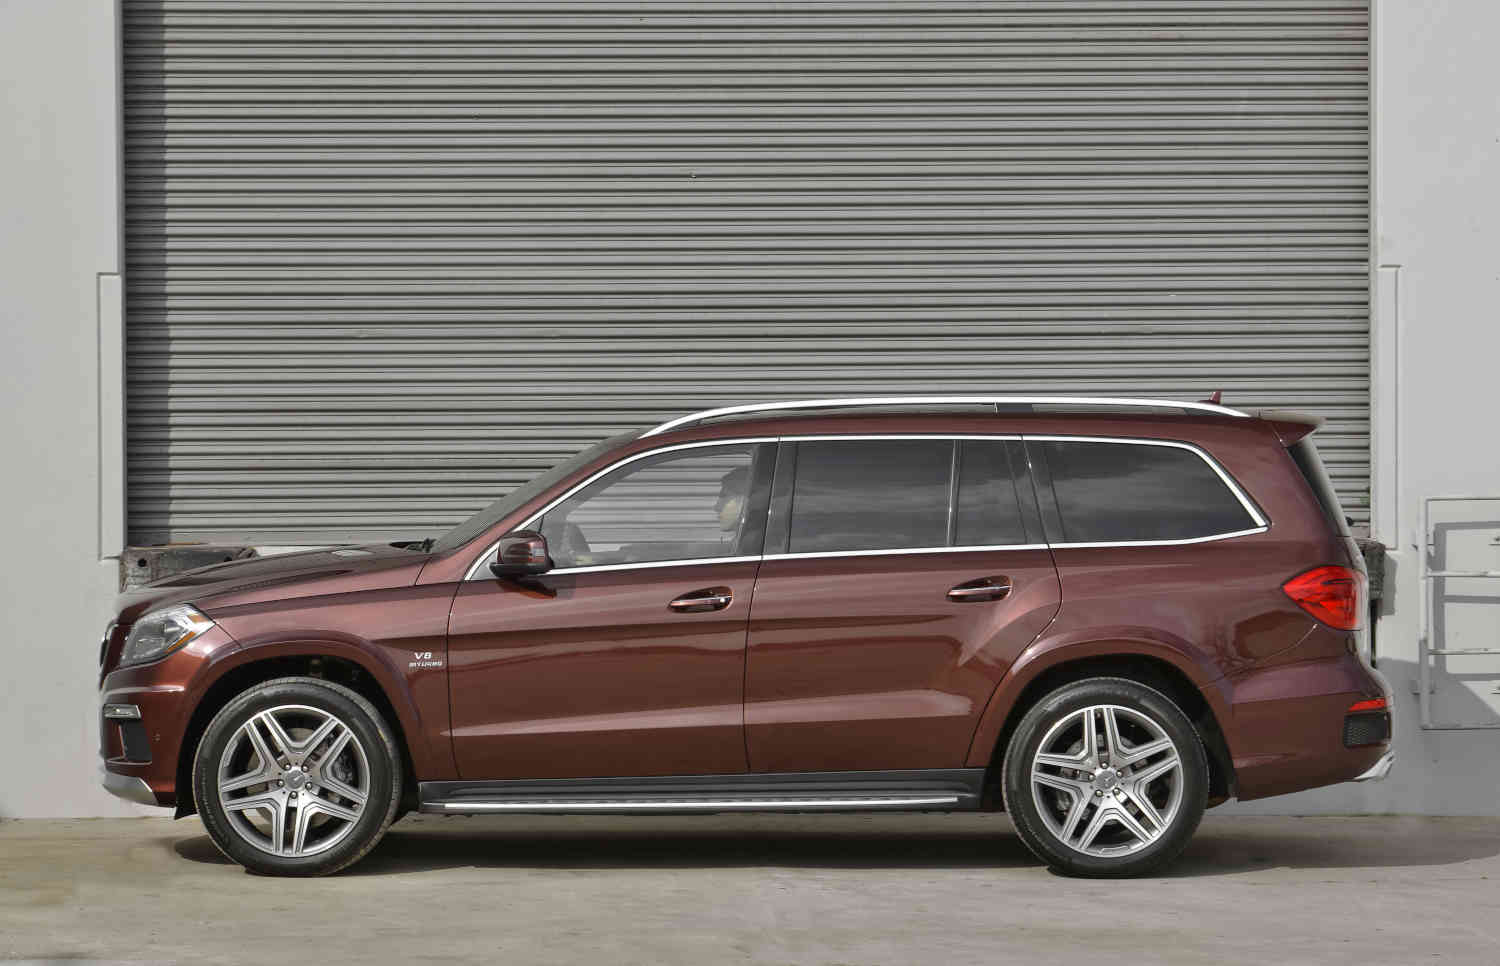 The 2013 Mercedes-Benz GL was the best large luxury SUV